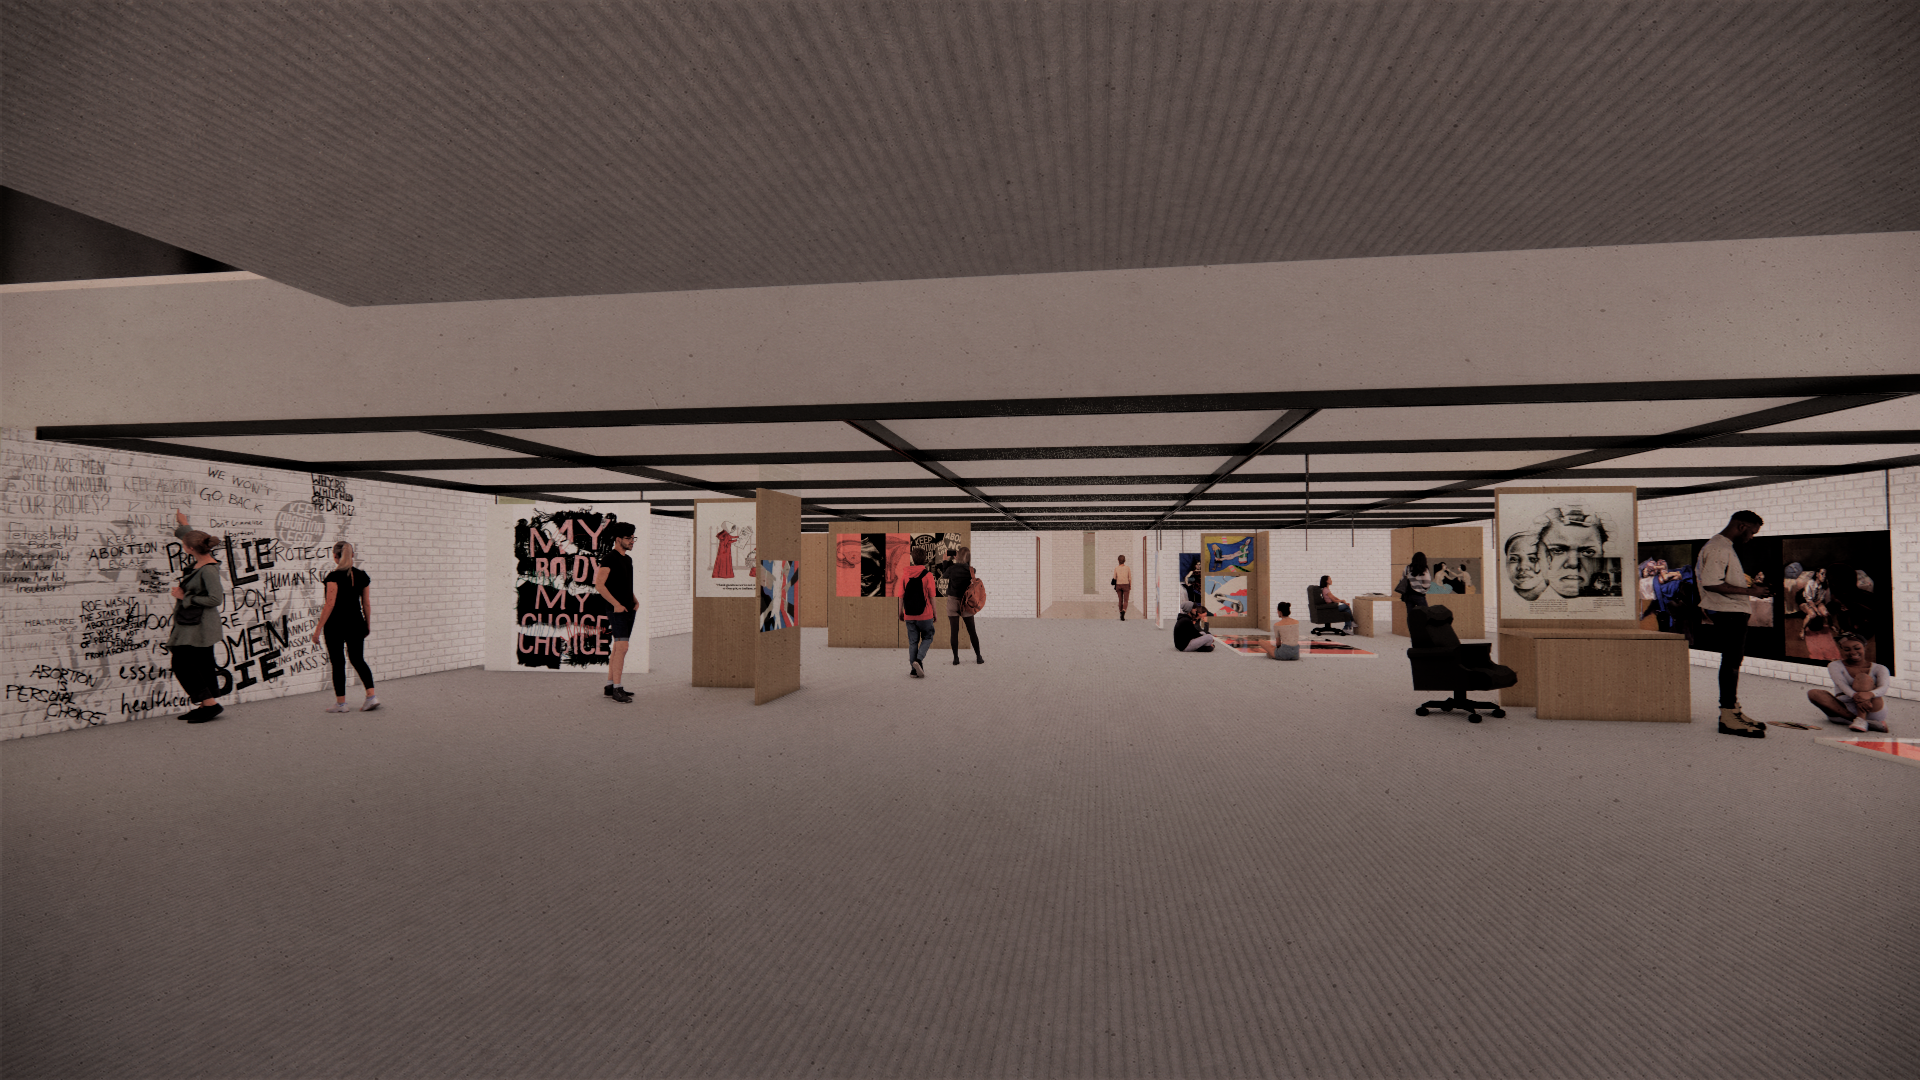 An interior rendering showing an activist art exhibition space where there is a ceiling track system and movable wall panels, so that artists can create art and display art in this space however they want. 